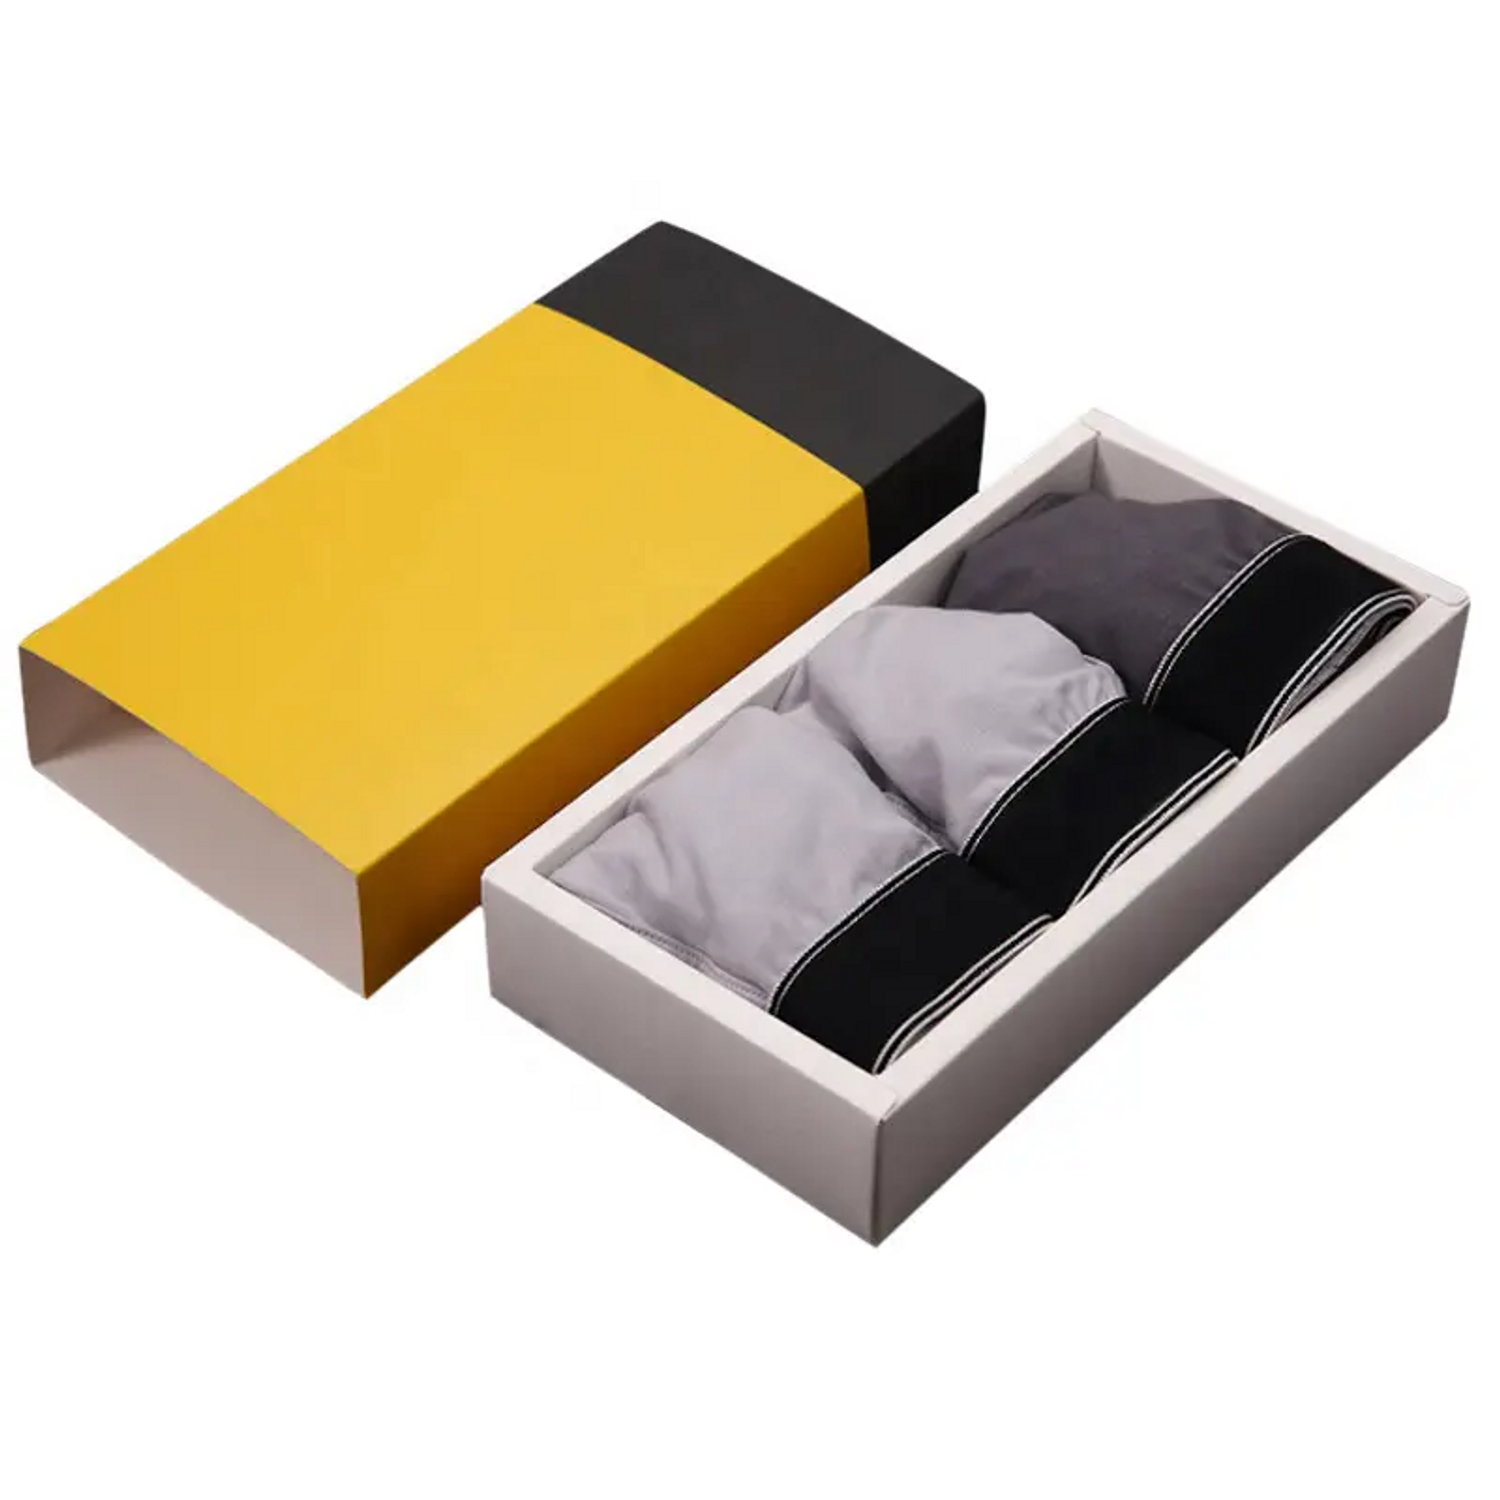 Sliding Out Socks Underwear Box Packaging With Drawer